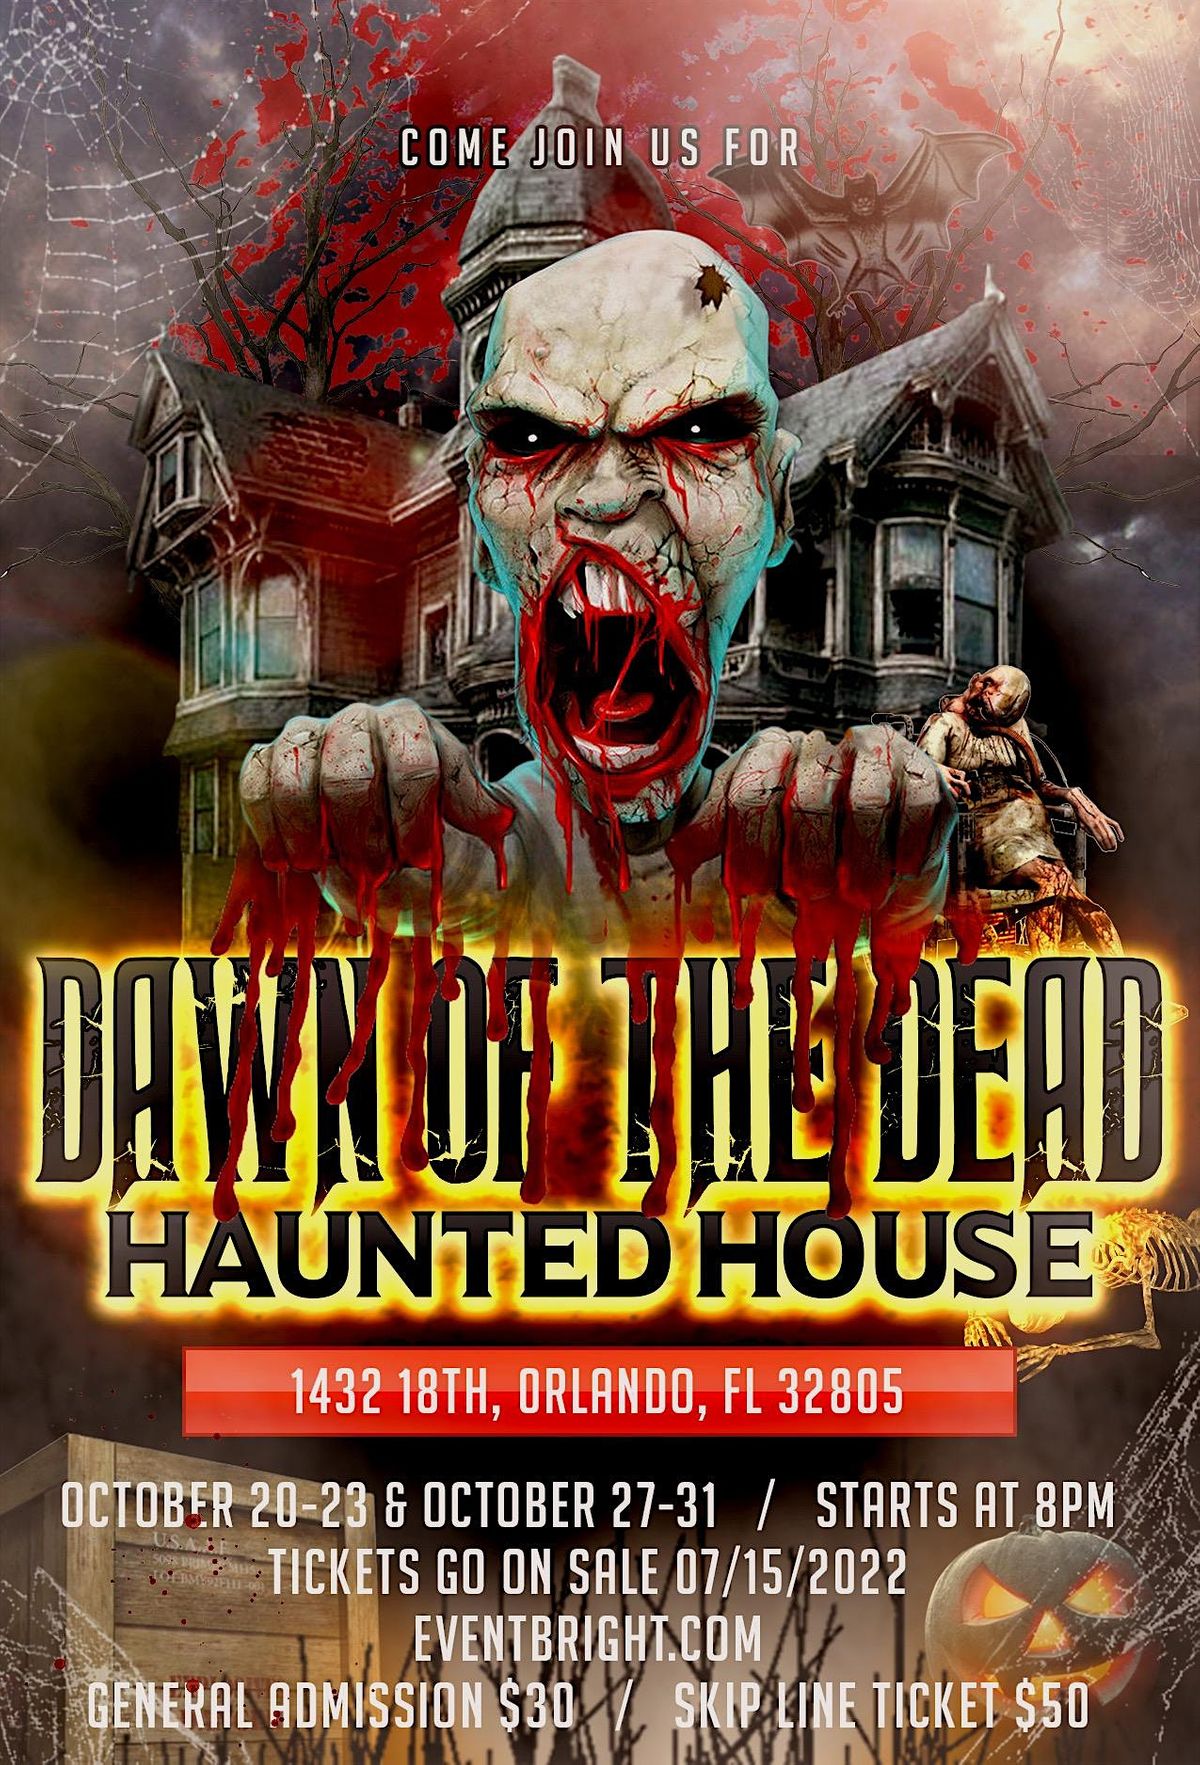 DAWN OF THE DEAD HAUNTED HOUSE